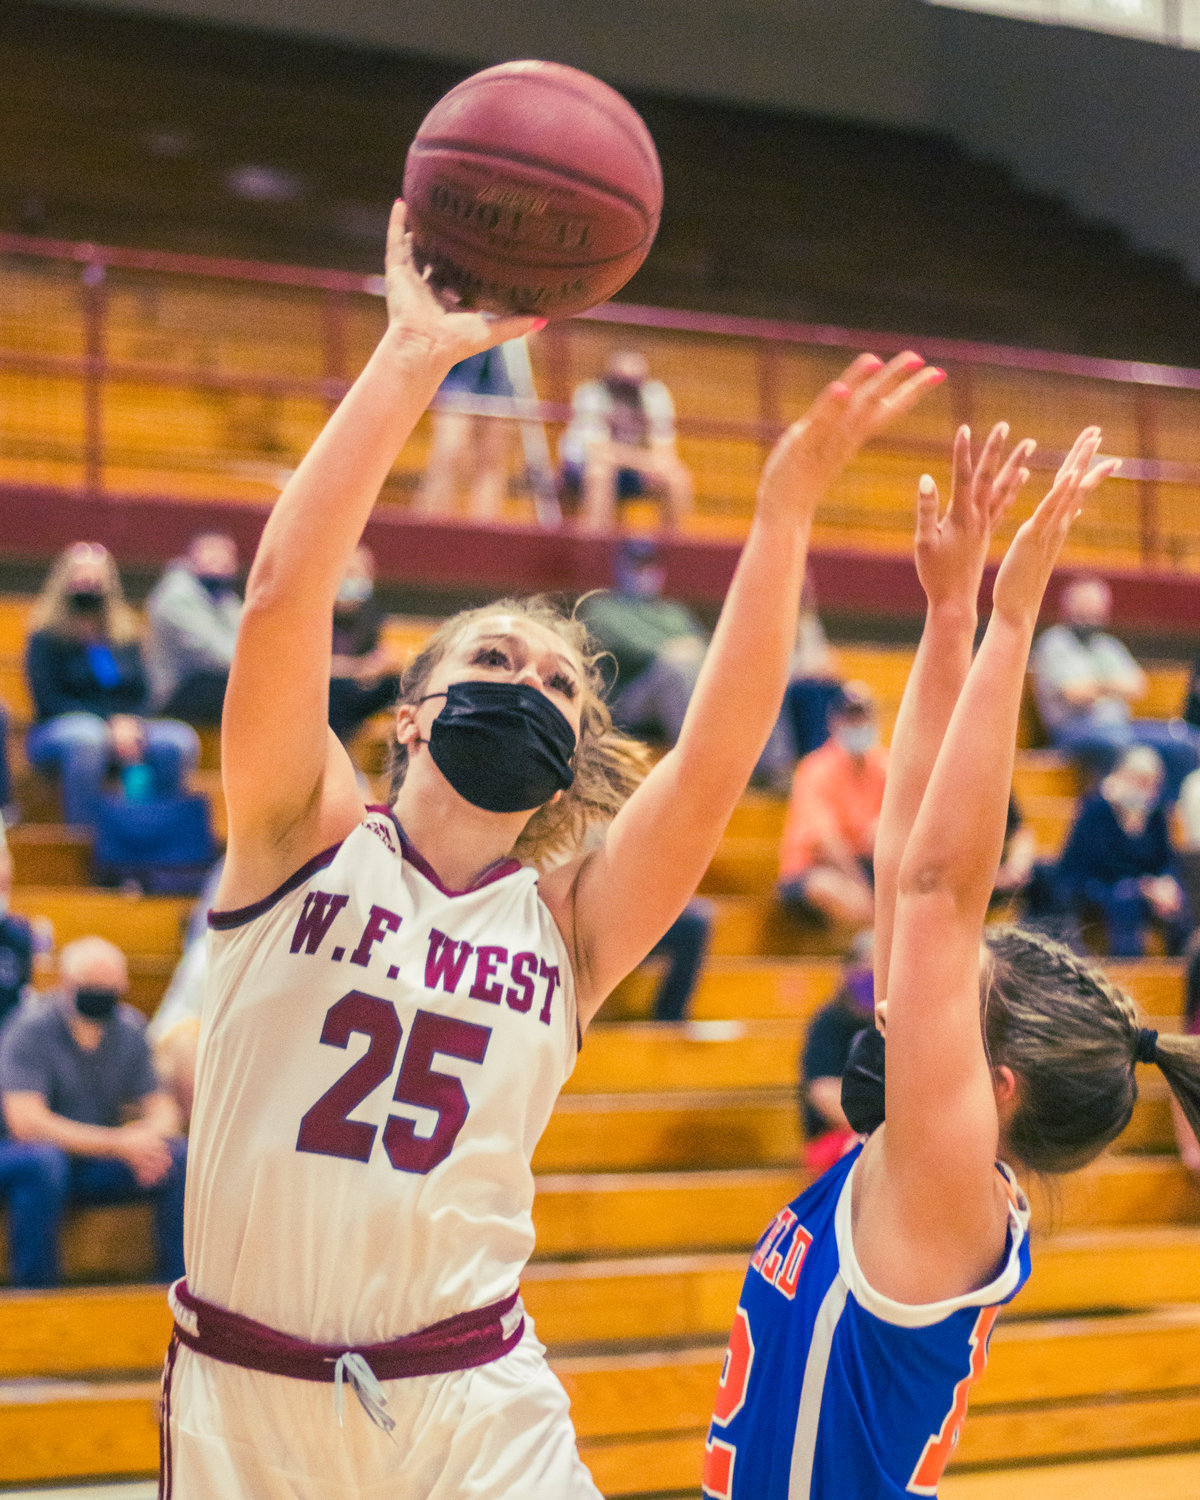 W.F. West's Kayla McCallum (25) goes up for a shot during a game against Ridgefield in Chehalis Wednesday night.